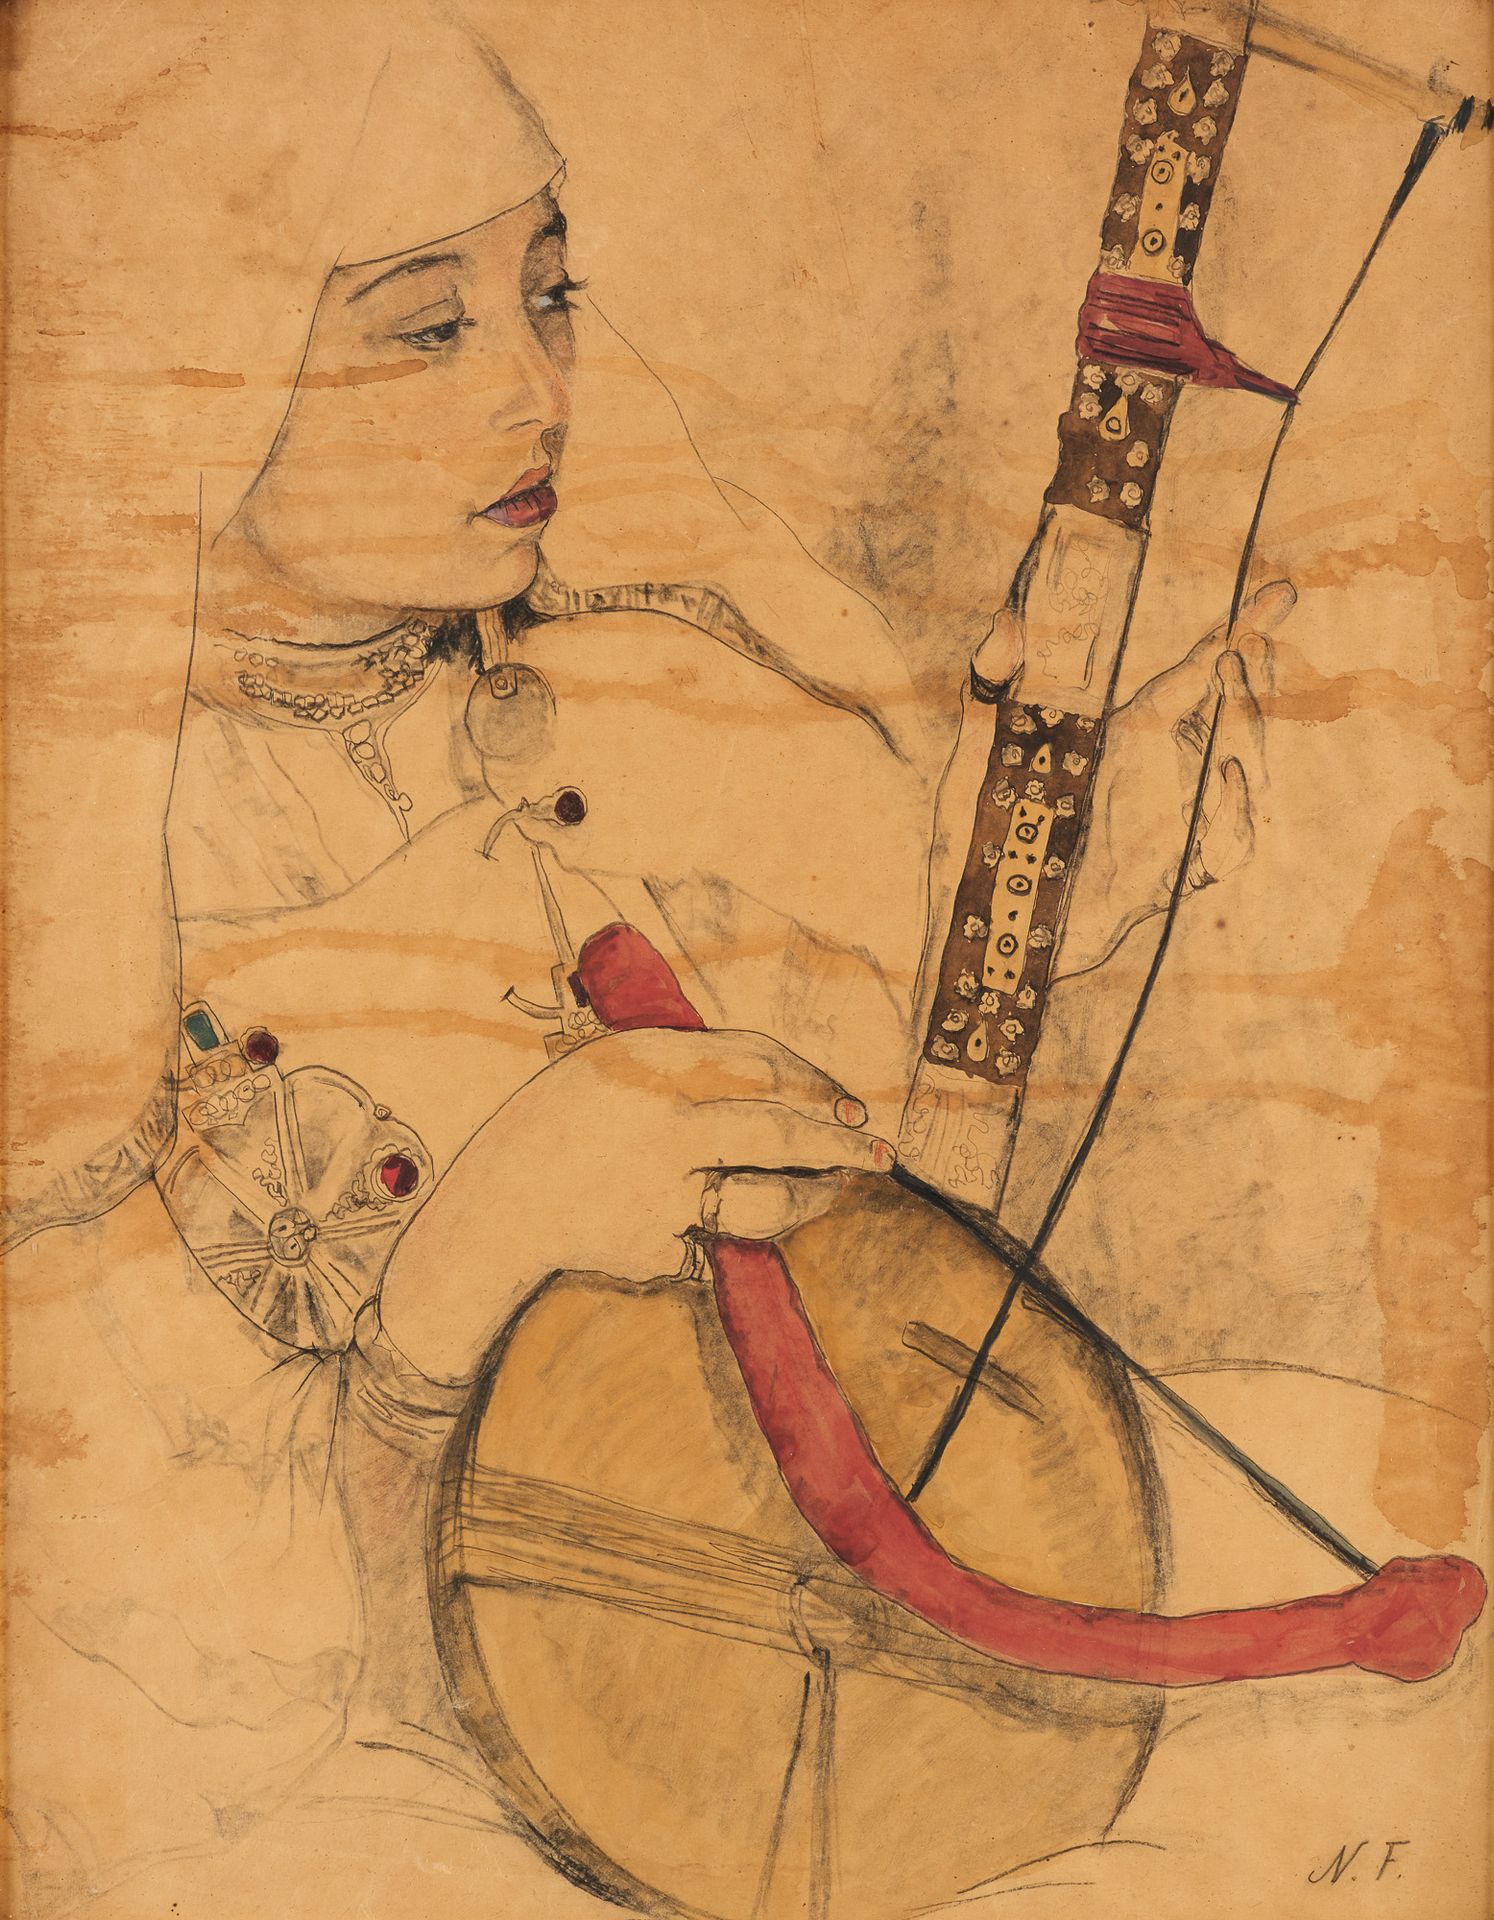 Circa 1900. Watercolor drawing on paper: Kamanche player.

Monogrammed: NF.

(tr&hellip;